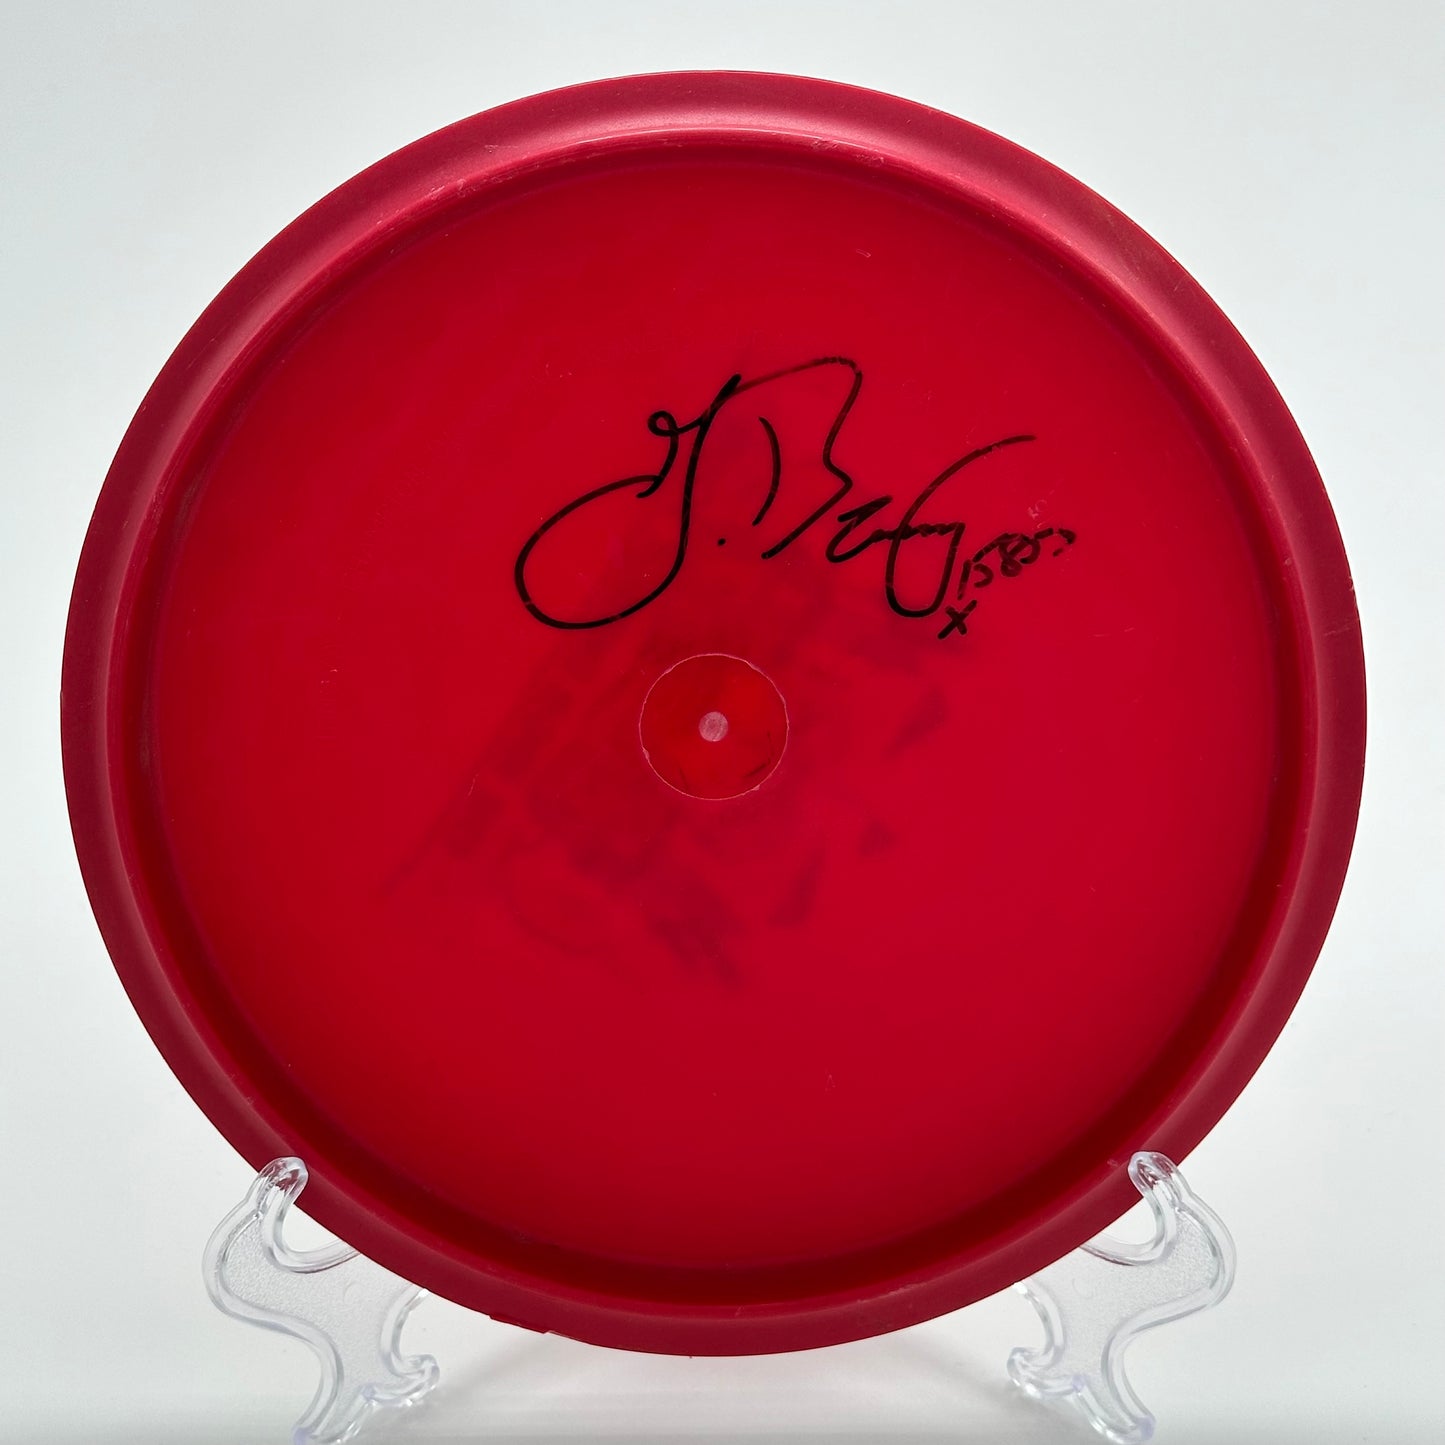 Innova Roc | KC Pro "The High Energy Tour" Signed Greg Barsby